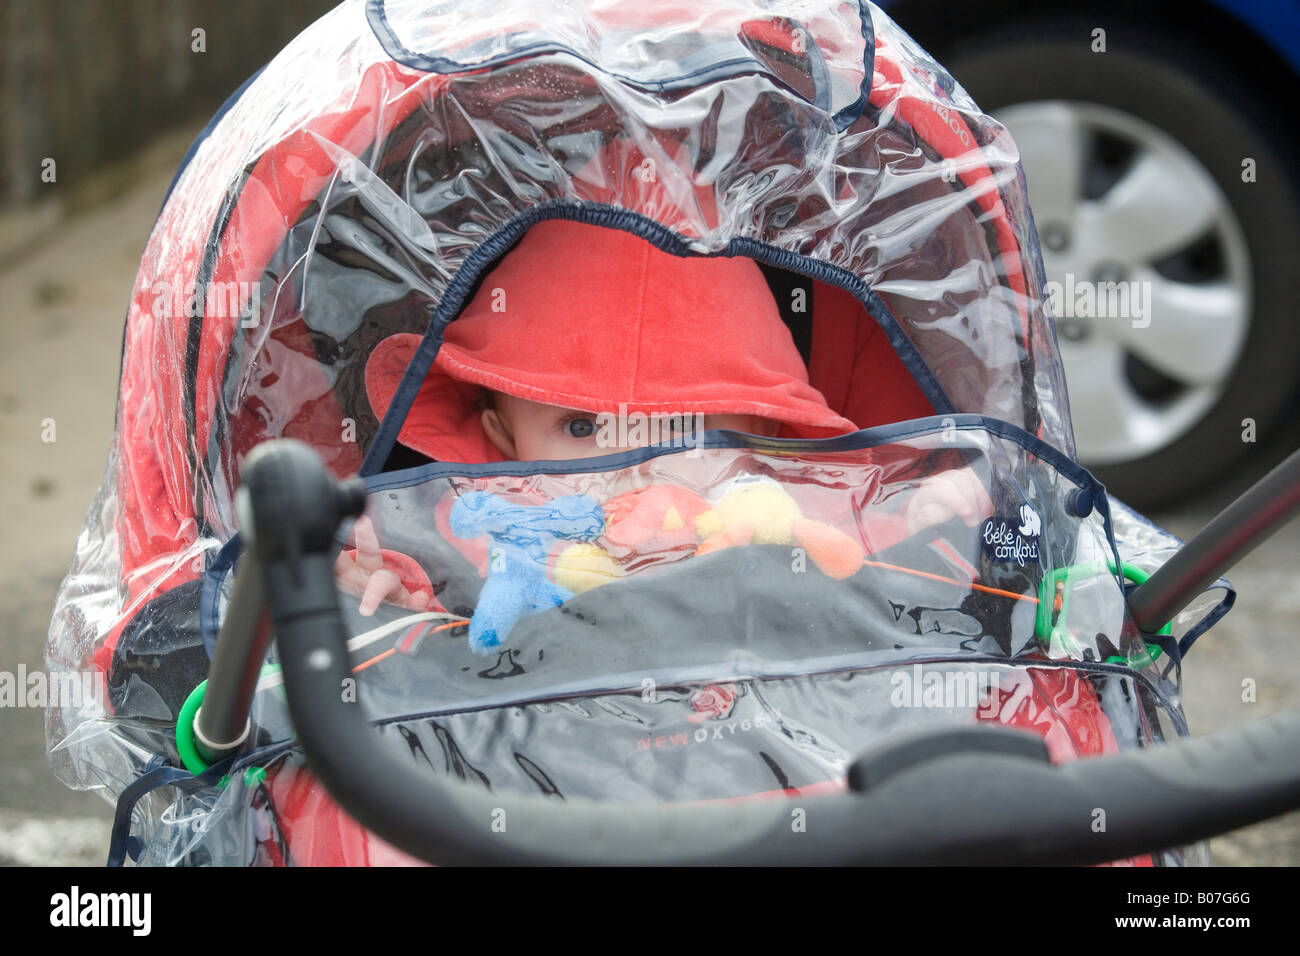 Baby in pushchair with rain cover Stock Photo